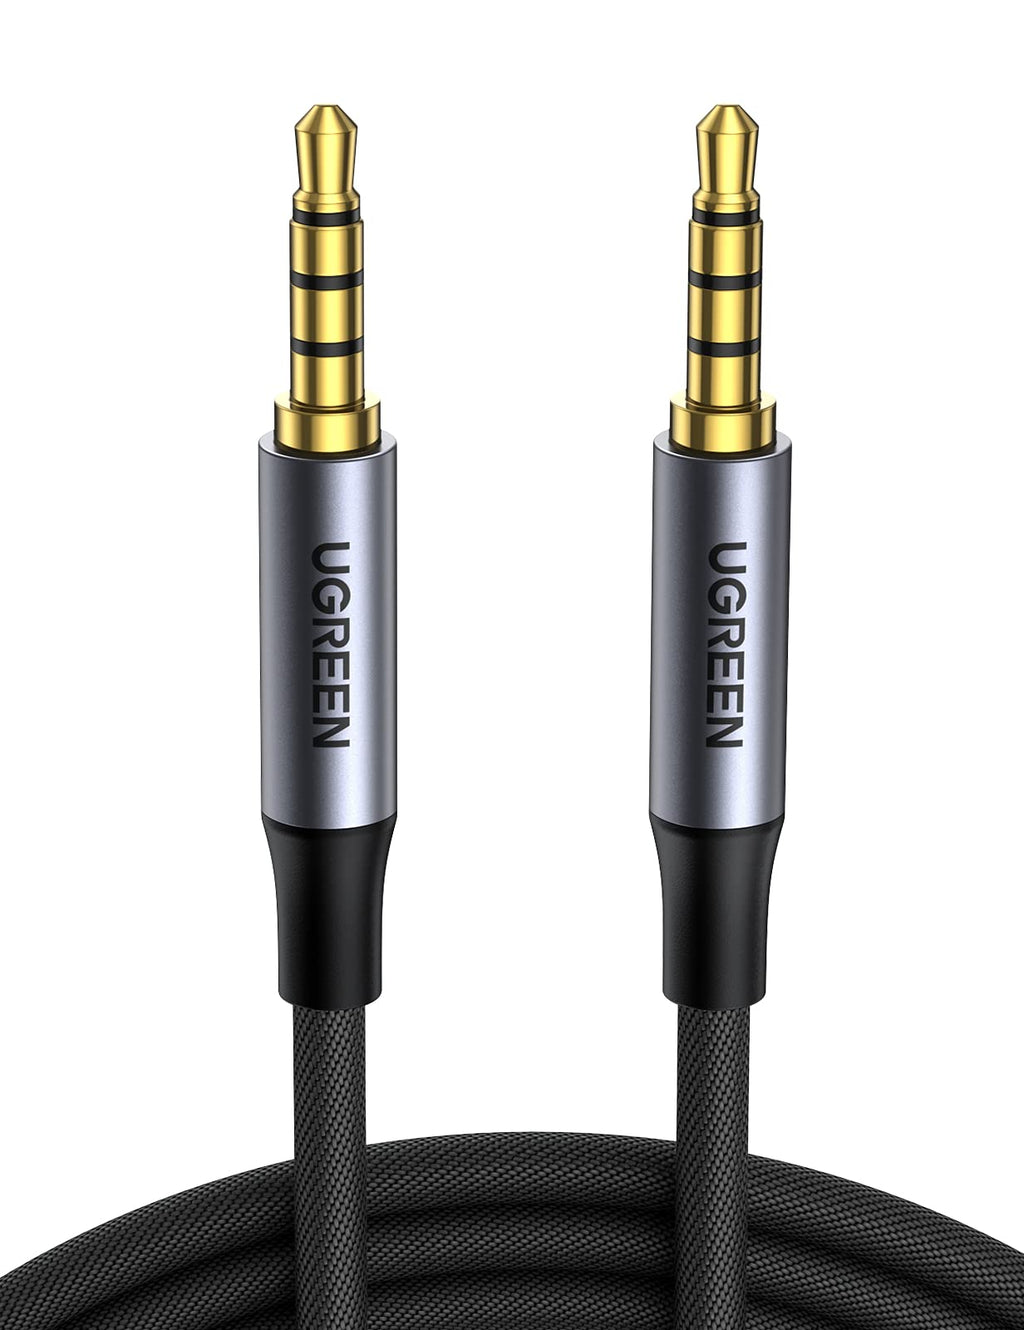  [AUSTRALIA] - UGREEN 3.5mm Audio Cable Braided 4-Pole Hi-Fi Stereo TRRS Jack Shielded Male to Male AUX Cord Compatible with iPad, Samsung Phones, Tablets, Car Home Stereos, Headphones, Speaker, 3FT